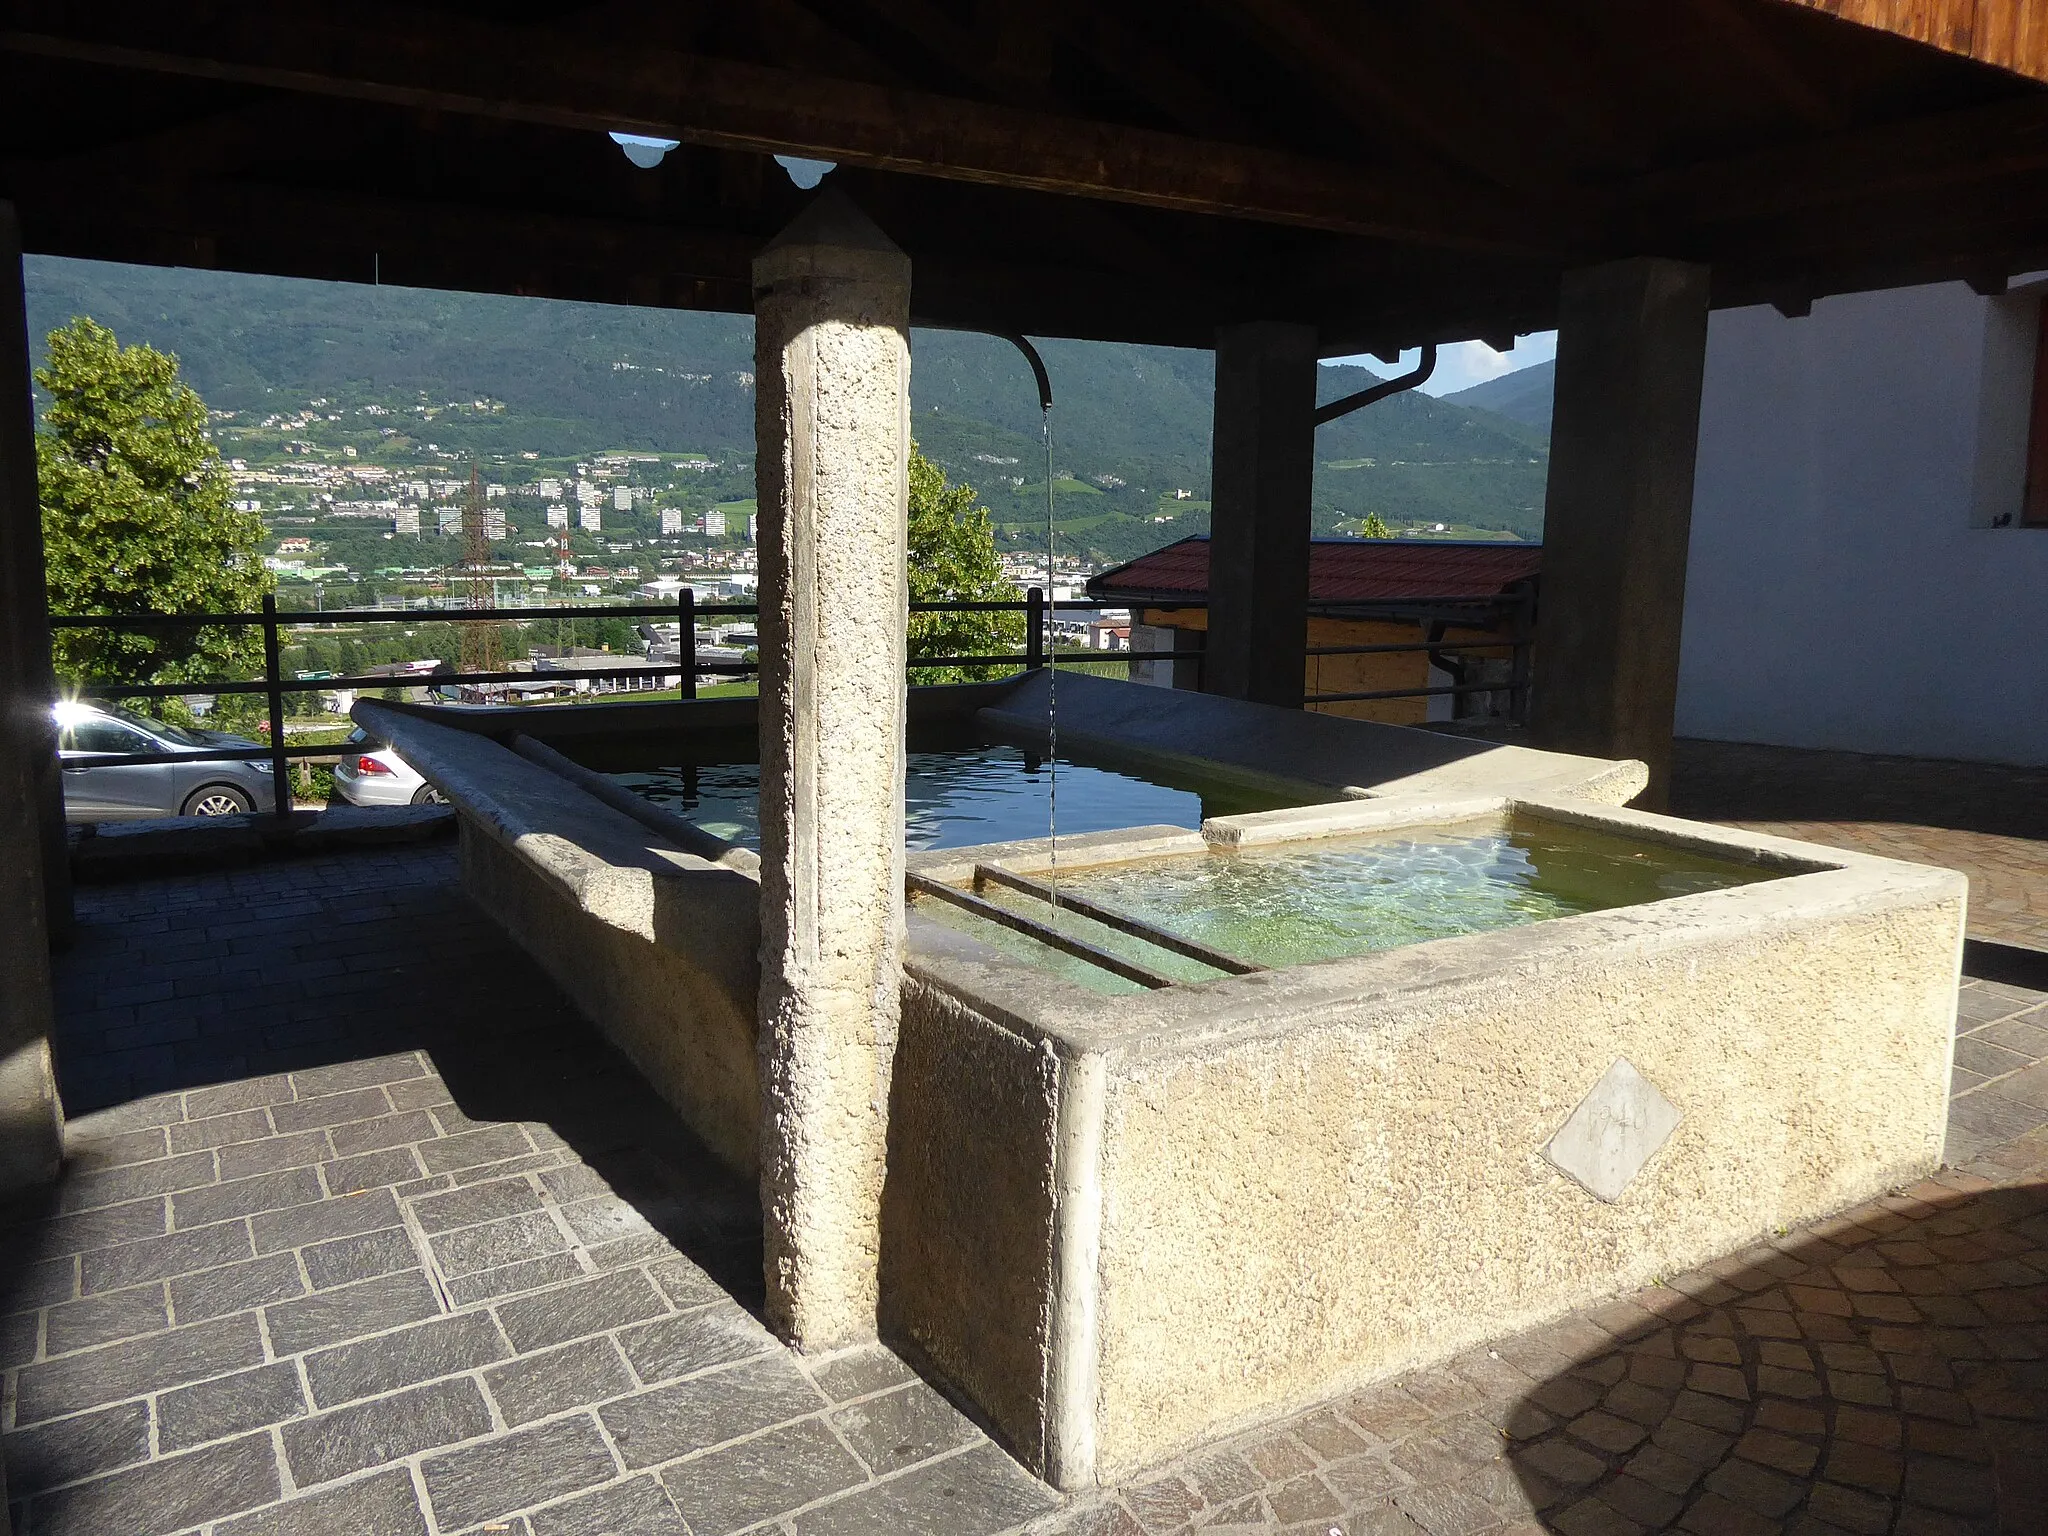 Photo showing: Belvedere (Trento, Italy) - Fountain